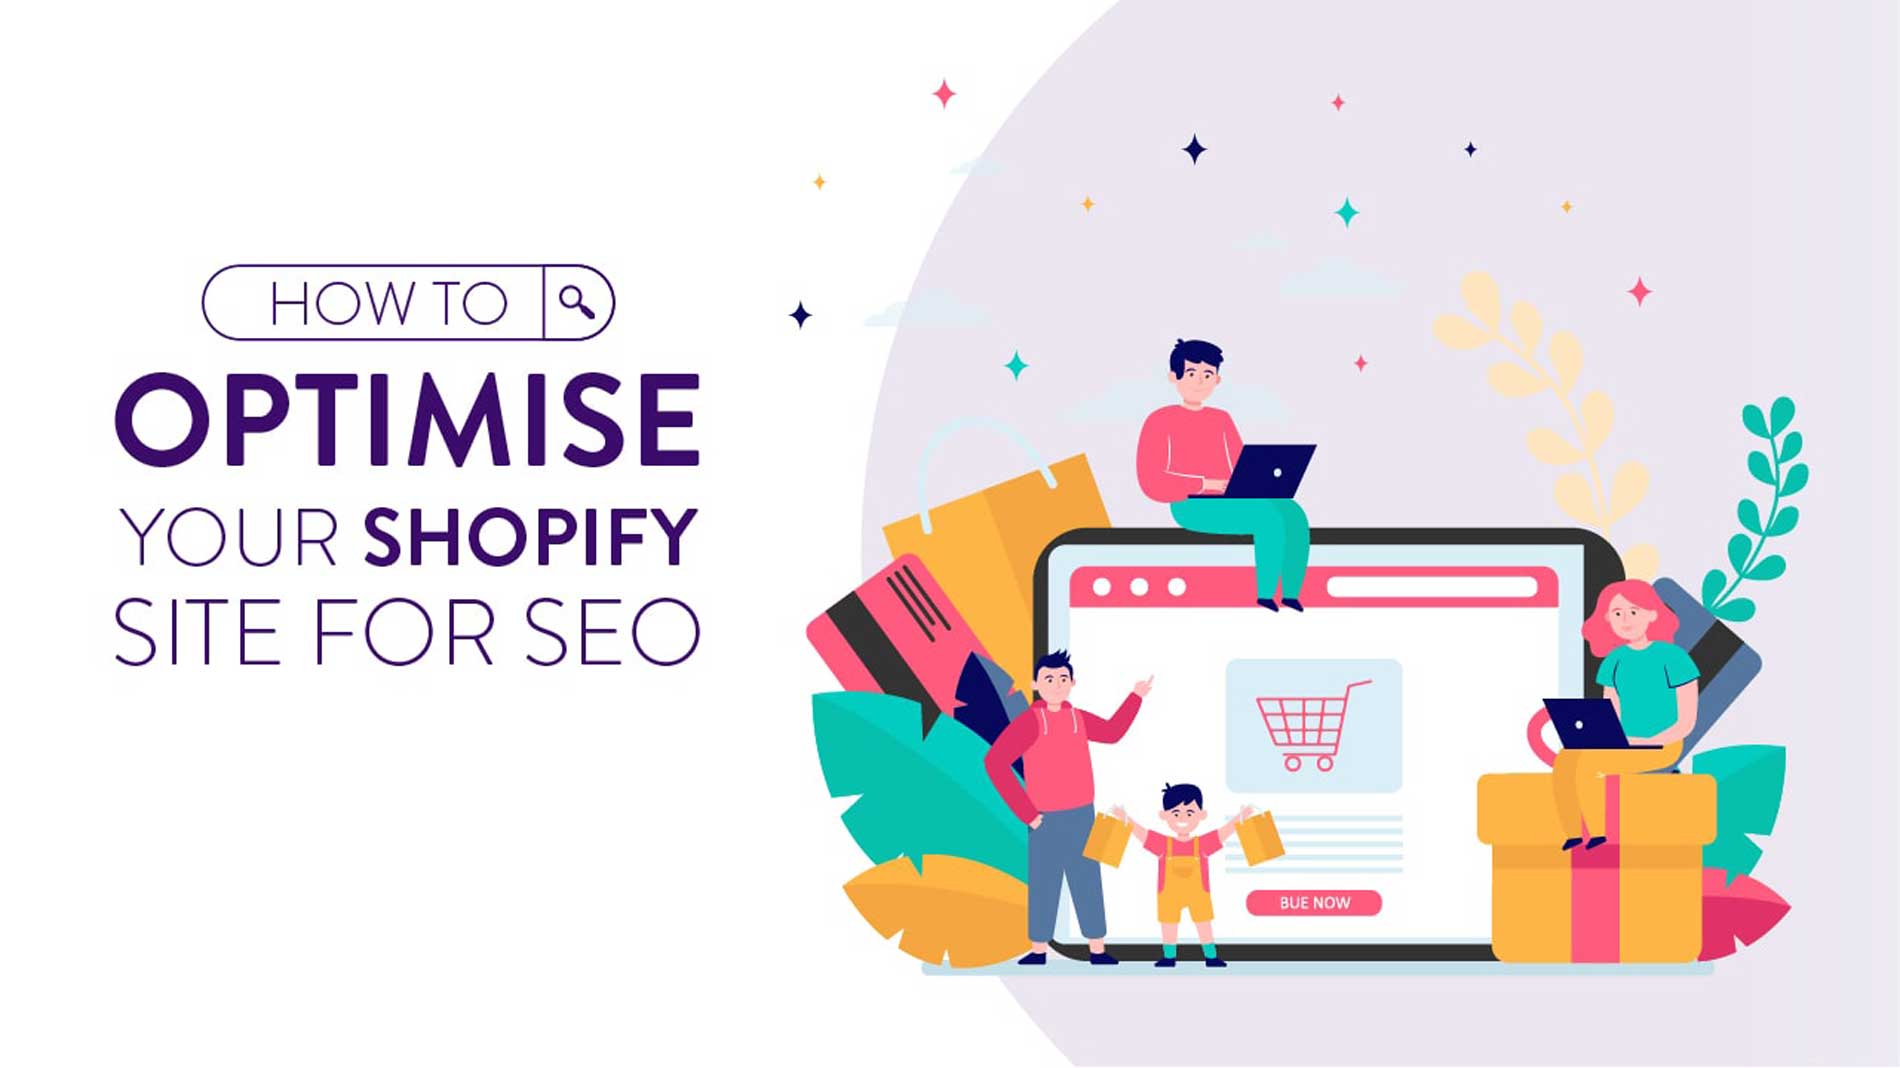 Infographic on how to optimise shopify site.